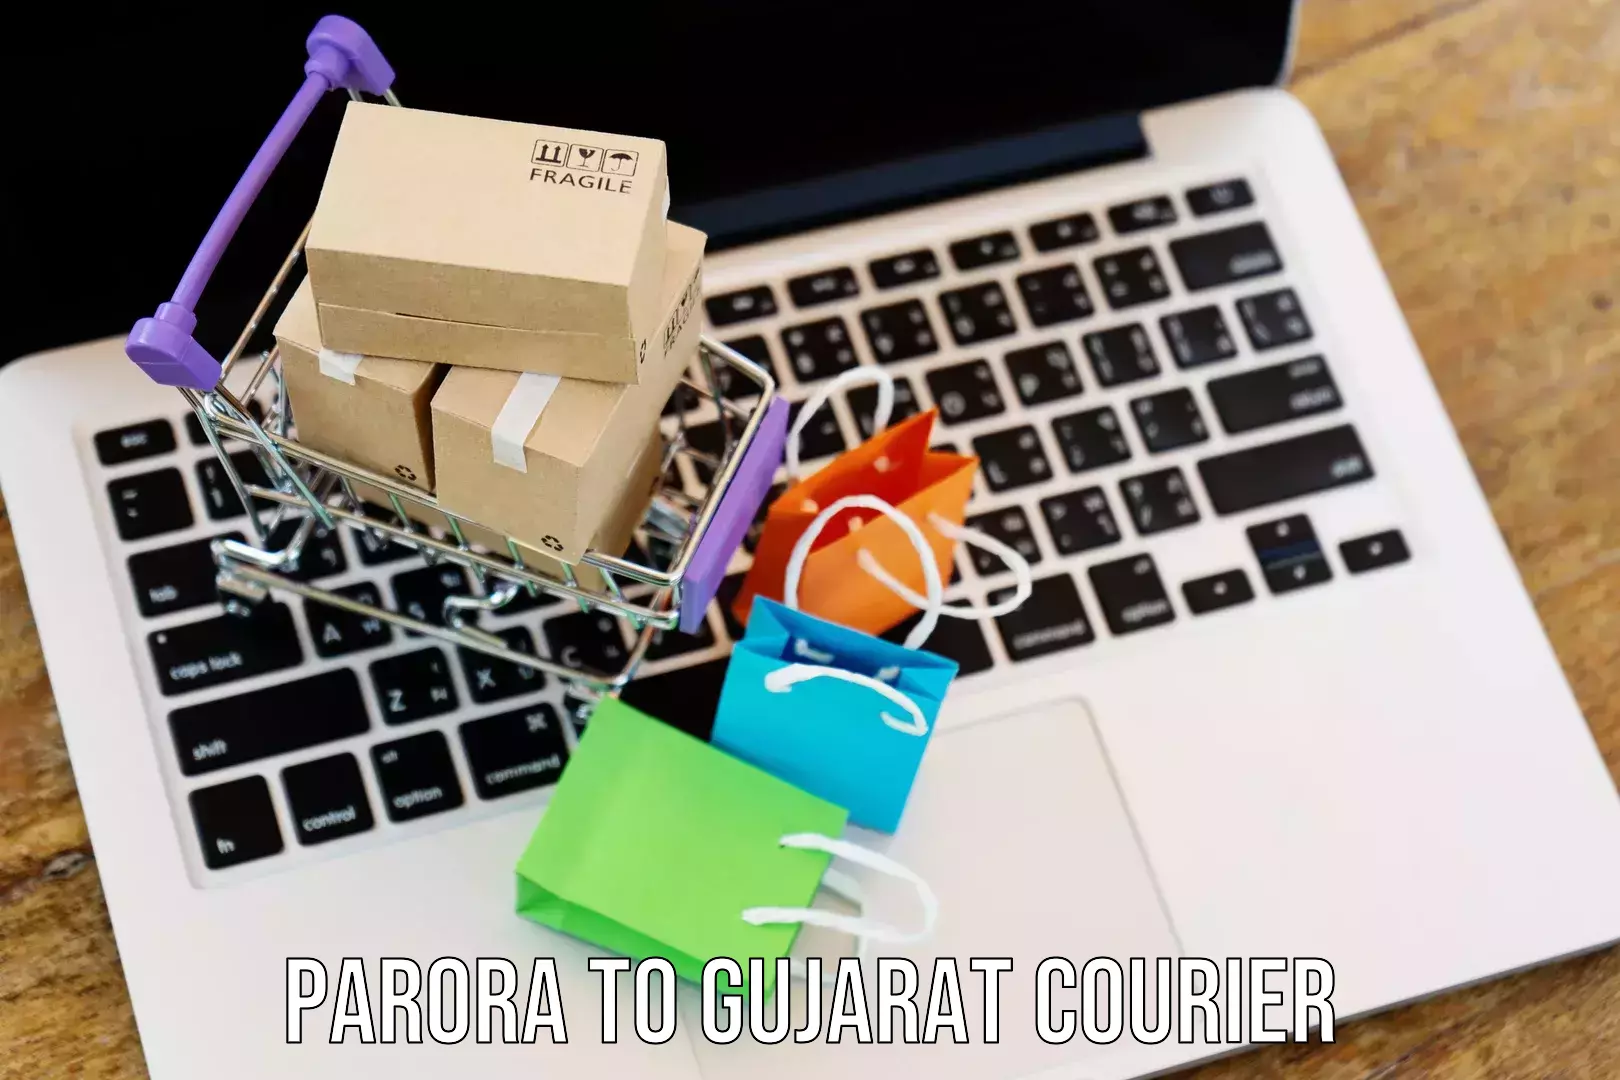 State-of-the-art courier technology Parora to Gujarat